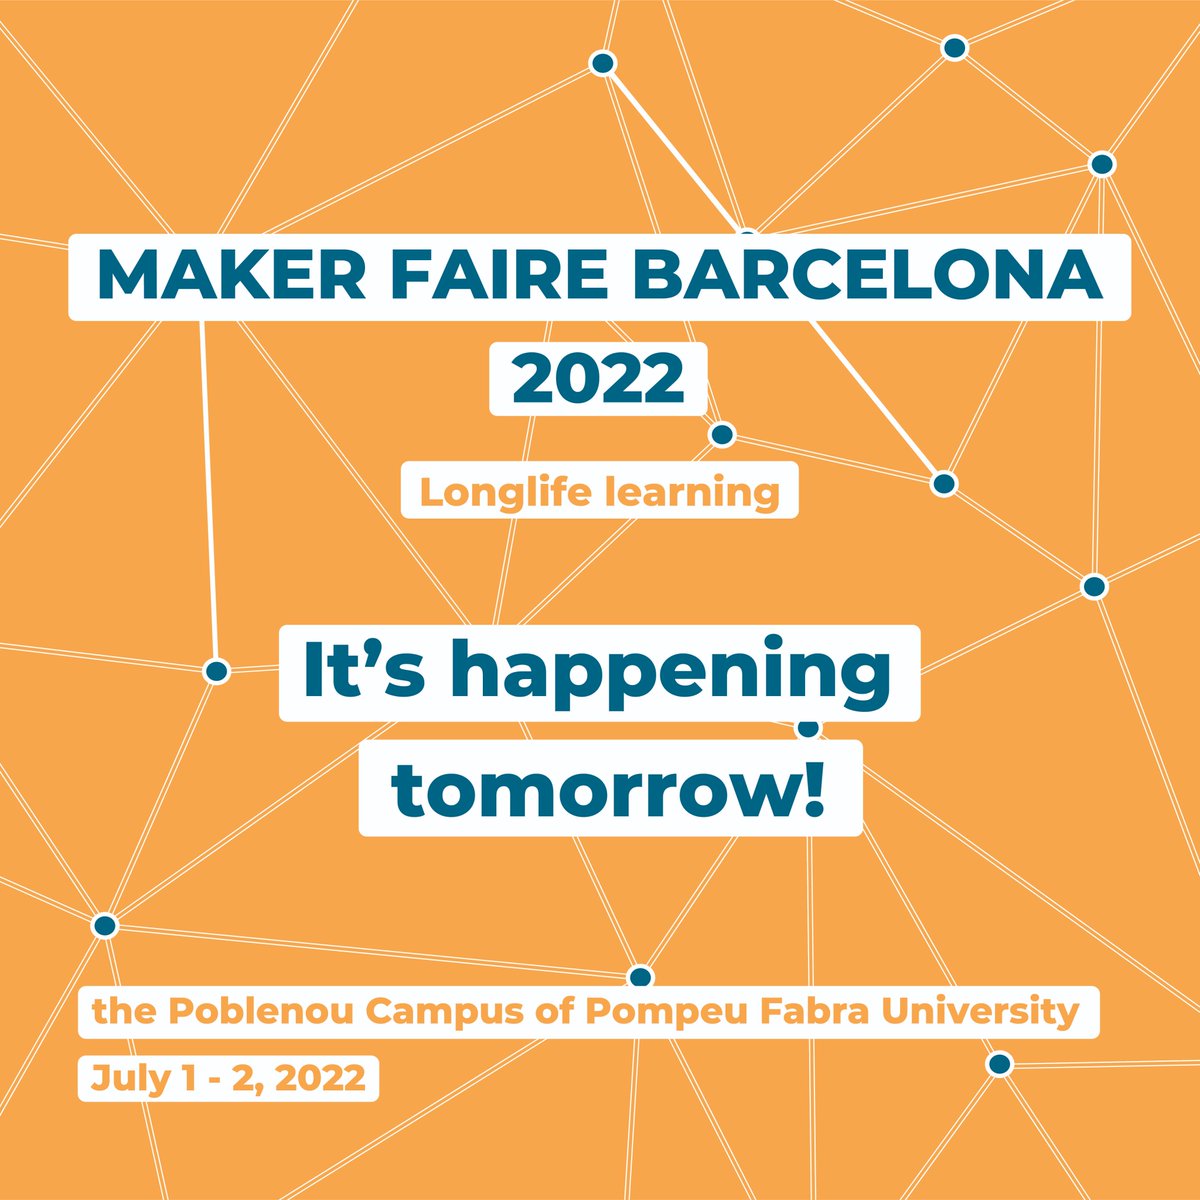 #MakerfaireBCN22 is happening tomorrow! COME

#MakerFaire is the largest celebration of invention, creativity, curiosity & hands on learning.

A meeting of engineers, artists, coders, scientists and garage inventors you can't miss. 

📍@upfbarcelona on Friday - Saturday, July 1-2 